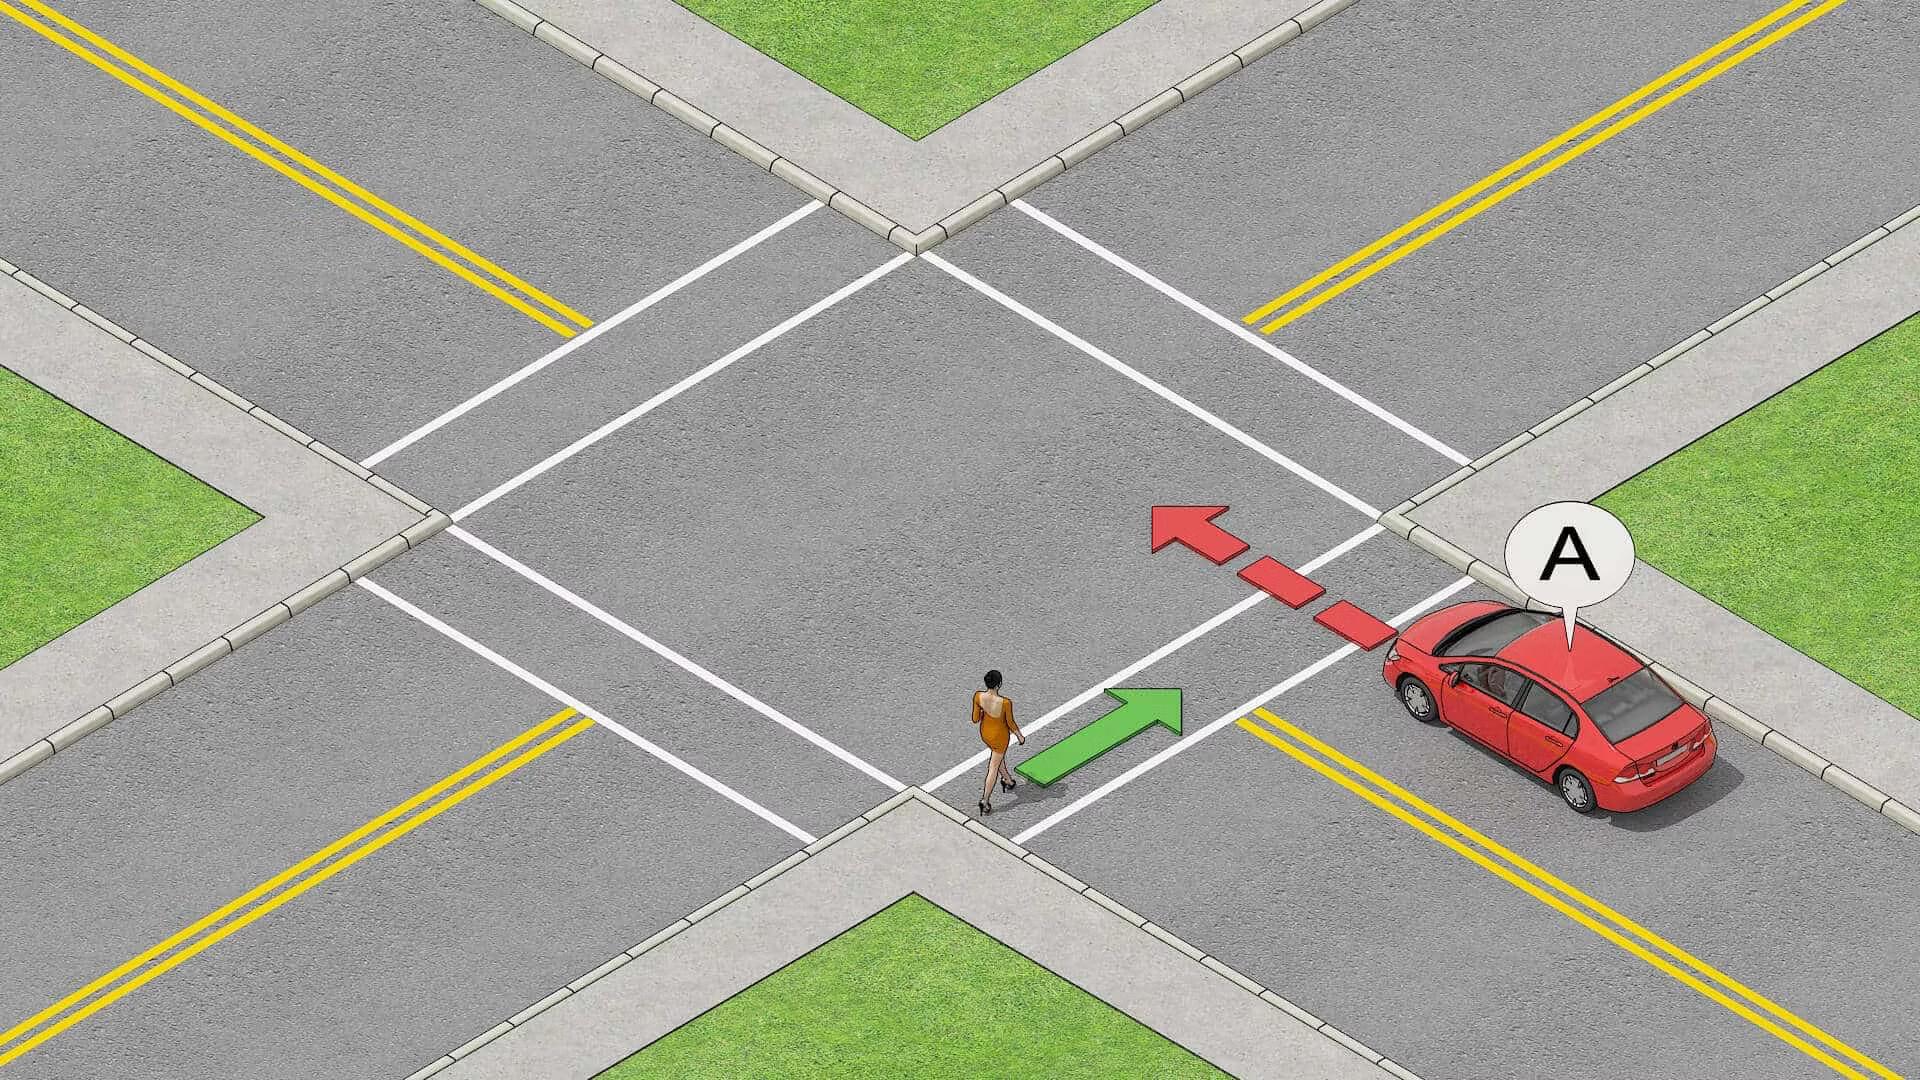 Priority at Uncontrolled Intersections: Right-Of-Way Rules